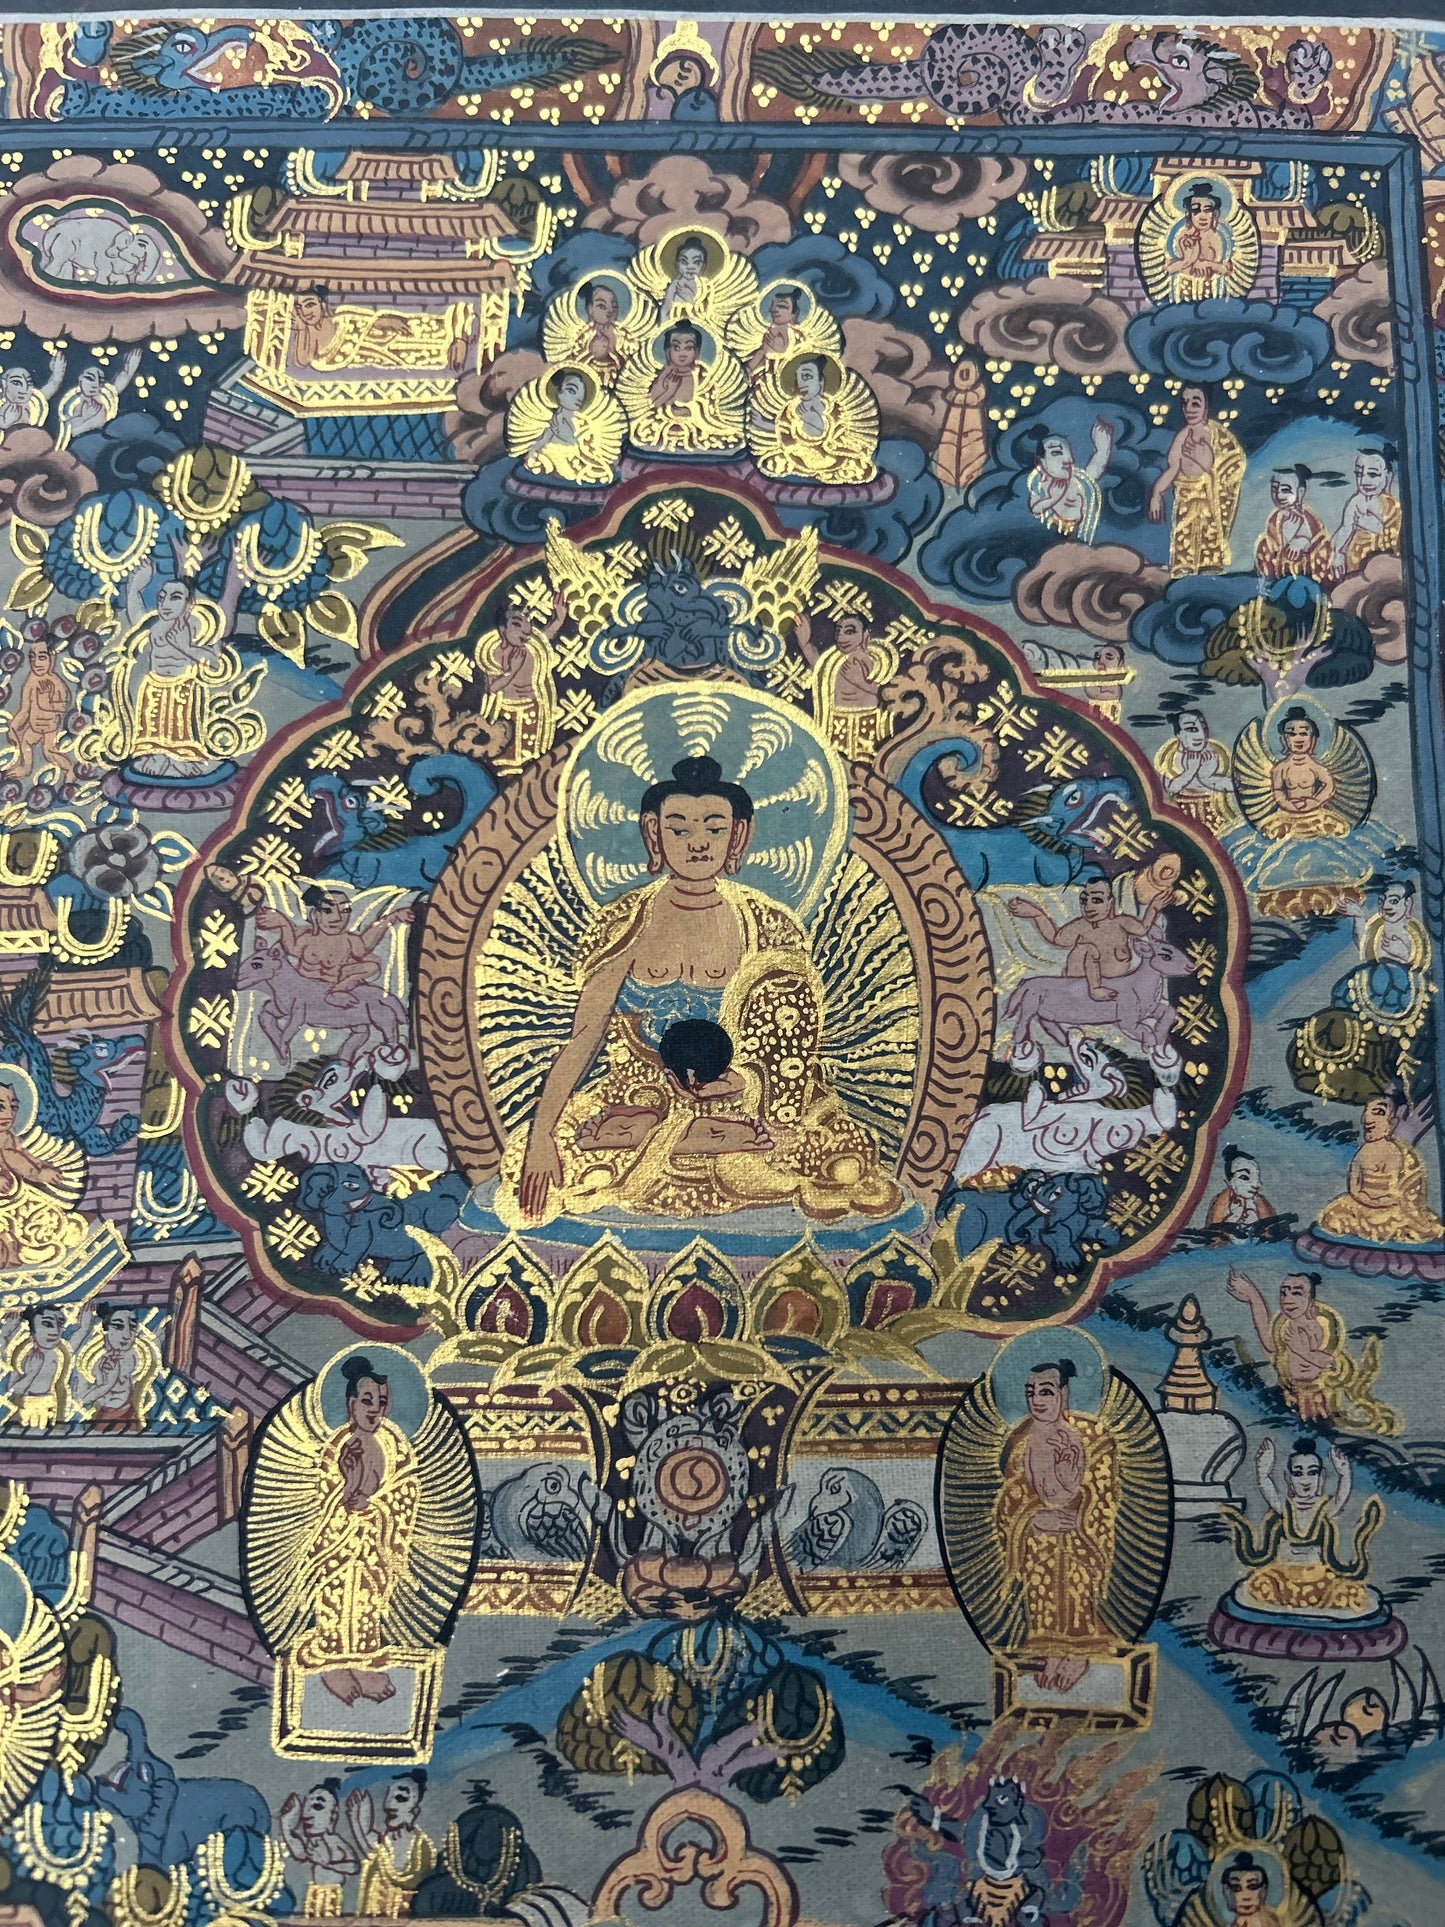 Buddha's Life Story Thangka: Artistic Journey of Enlightenment